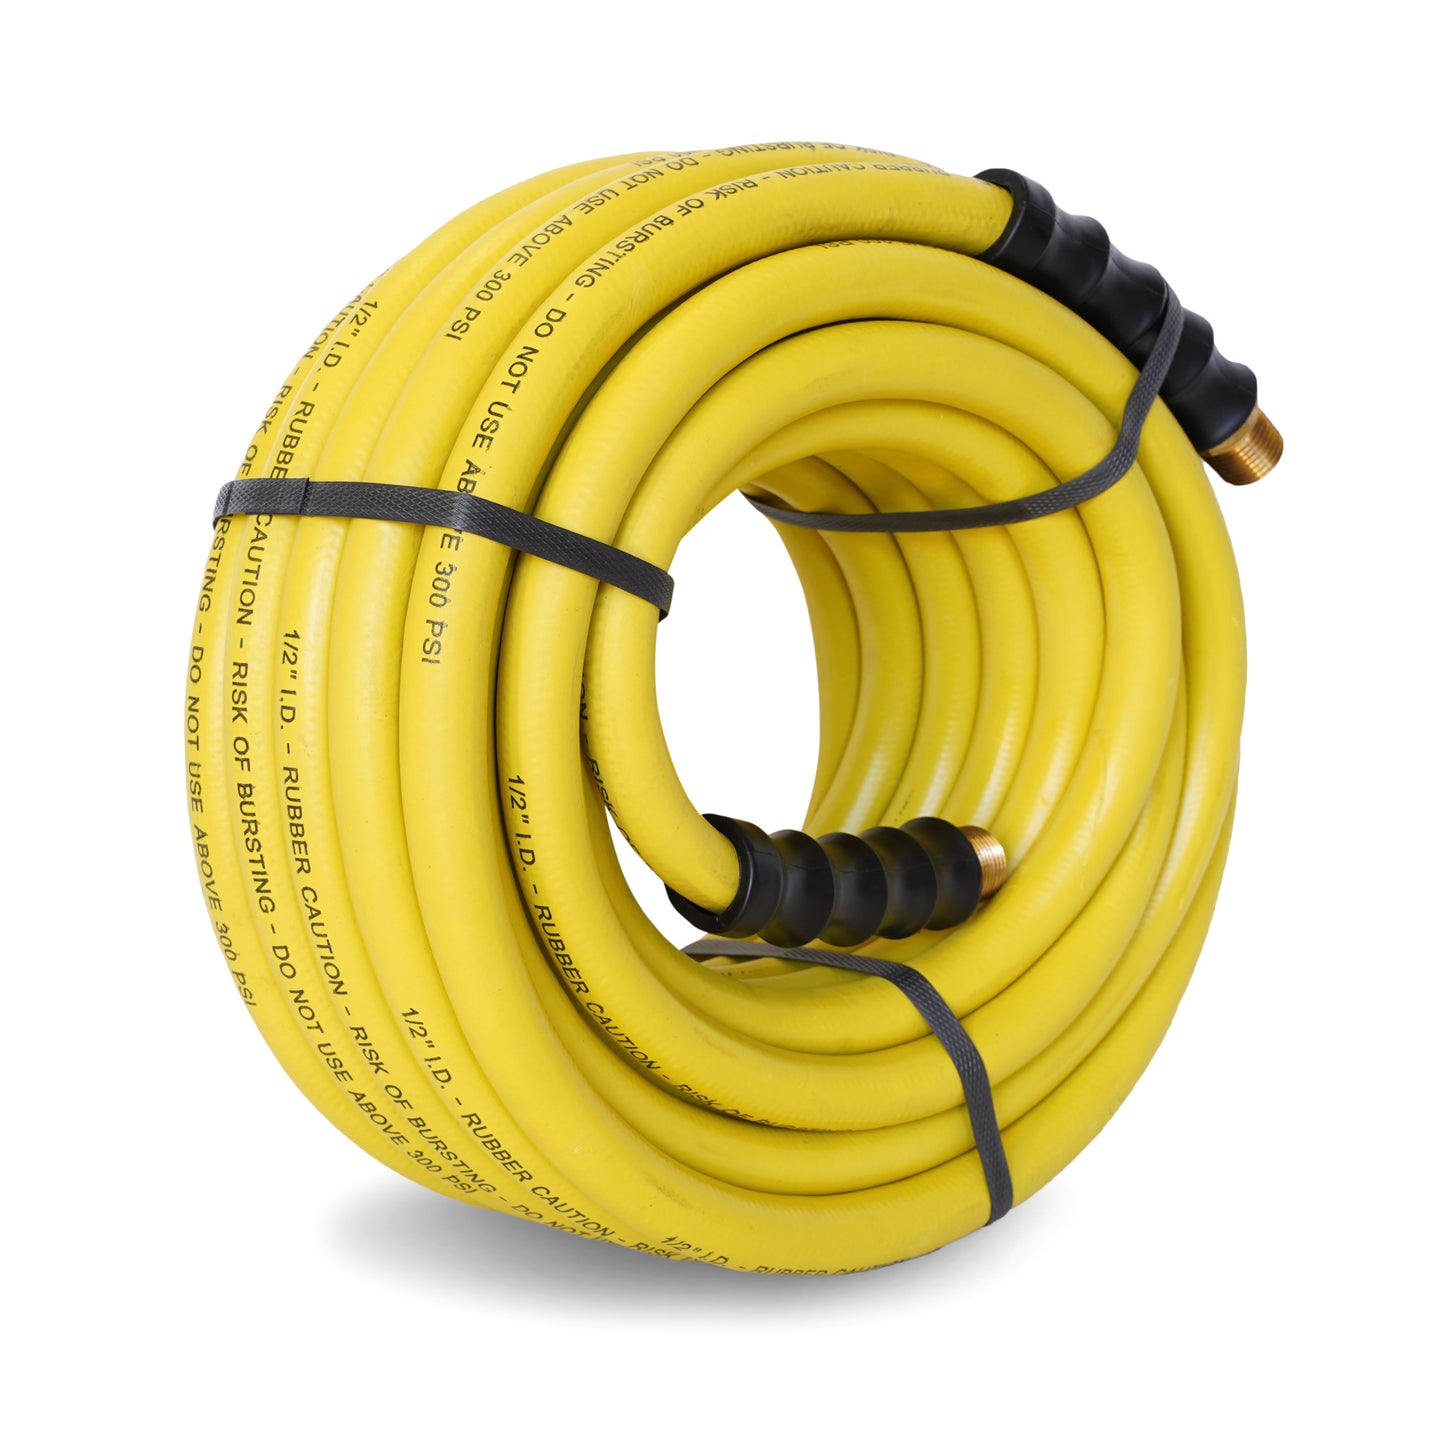 Steelman 50-Ft Rubber 1/2-In Id Replacement Hose, 1/2-In Npt